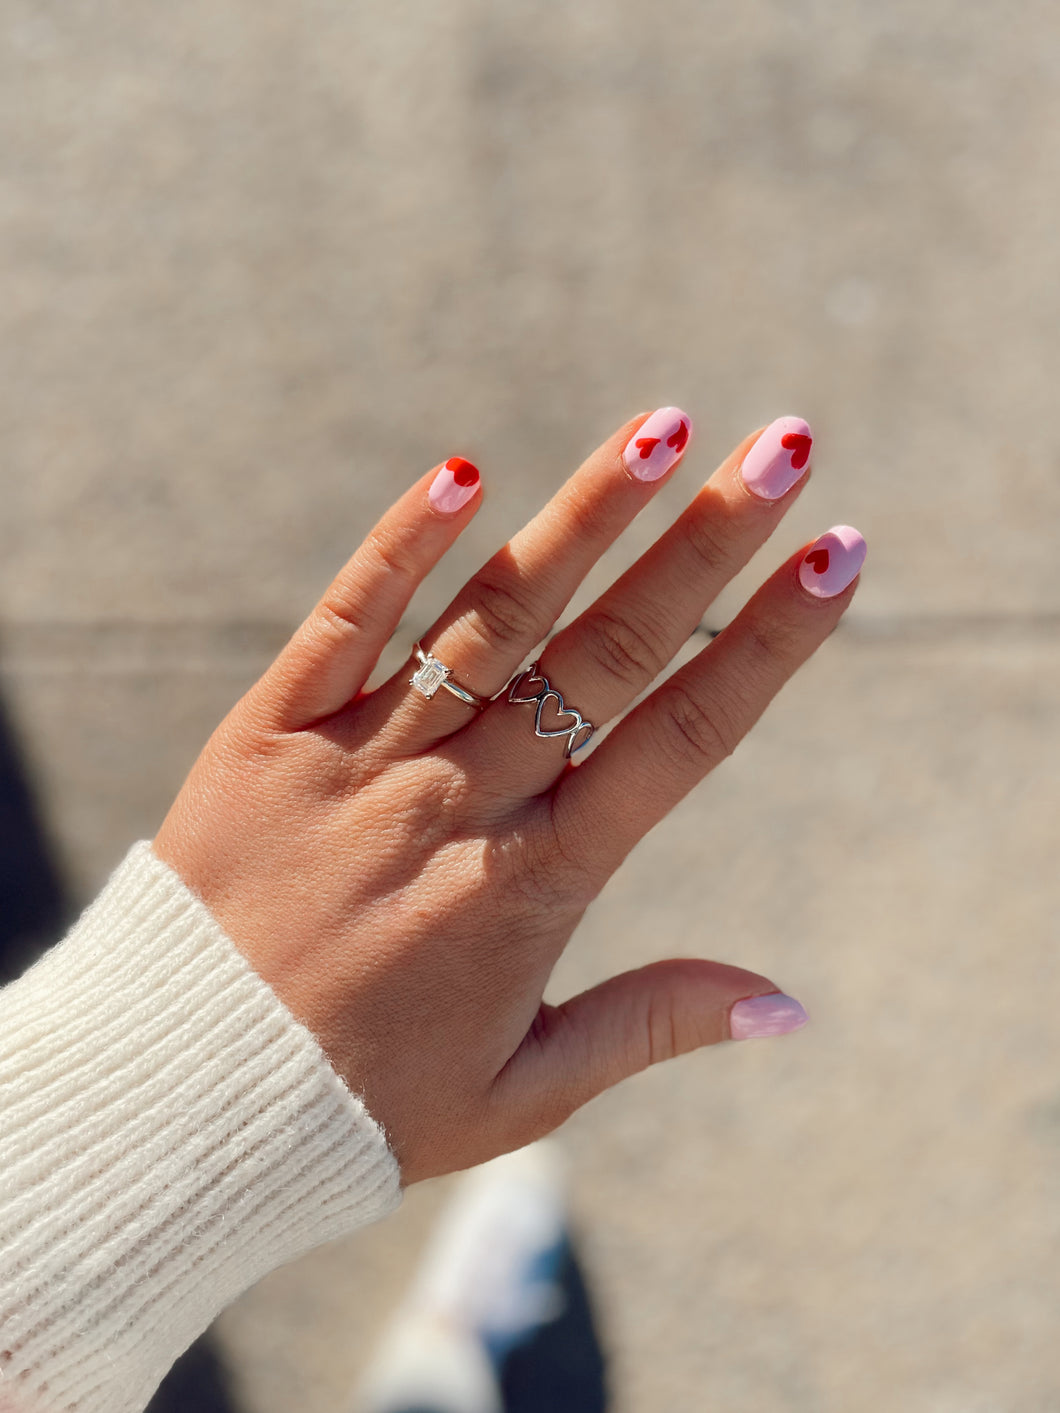 Hearts on Hearts Ring: Silver